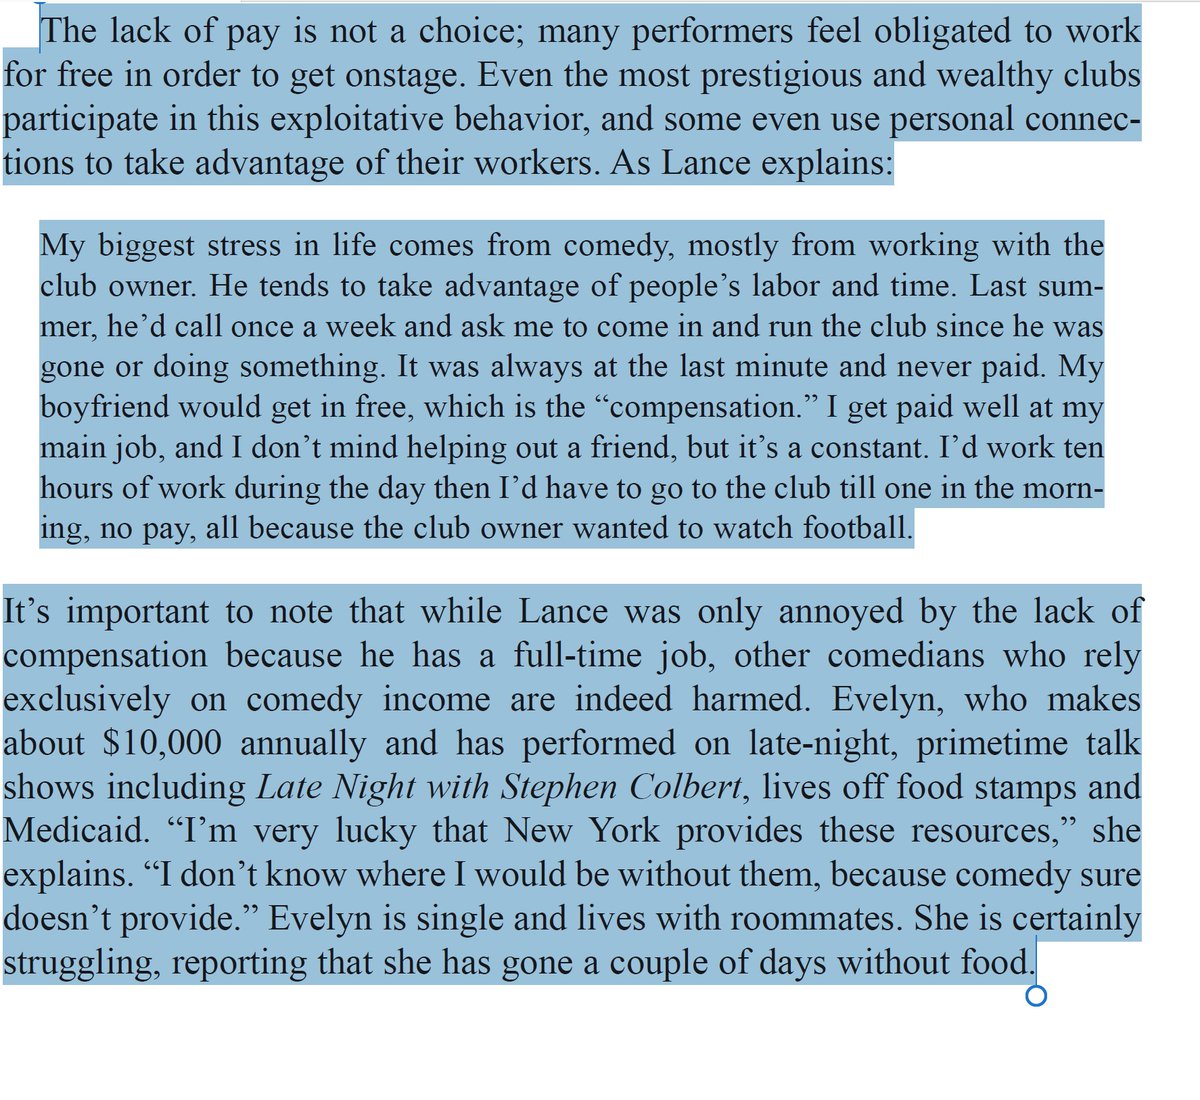 I love this passage on financial exploitation in #standup #comedy. Being forced to work for nothing at all levels, even people who have performed @colbertlateshow are on food stamps and skipping meals. #WorkersRights
#FairPay #EndExploitation #FightForFairness #WageJustice